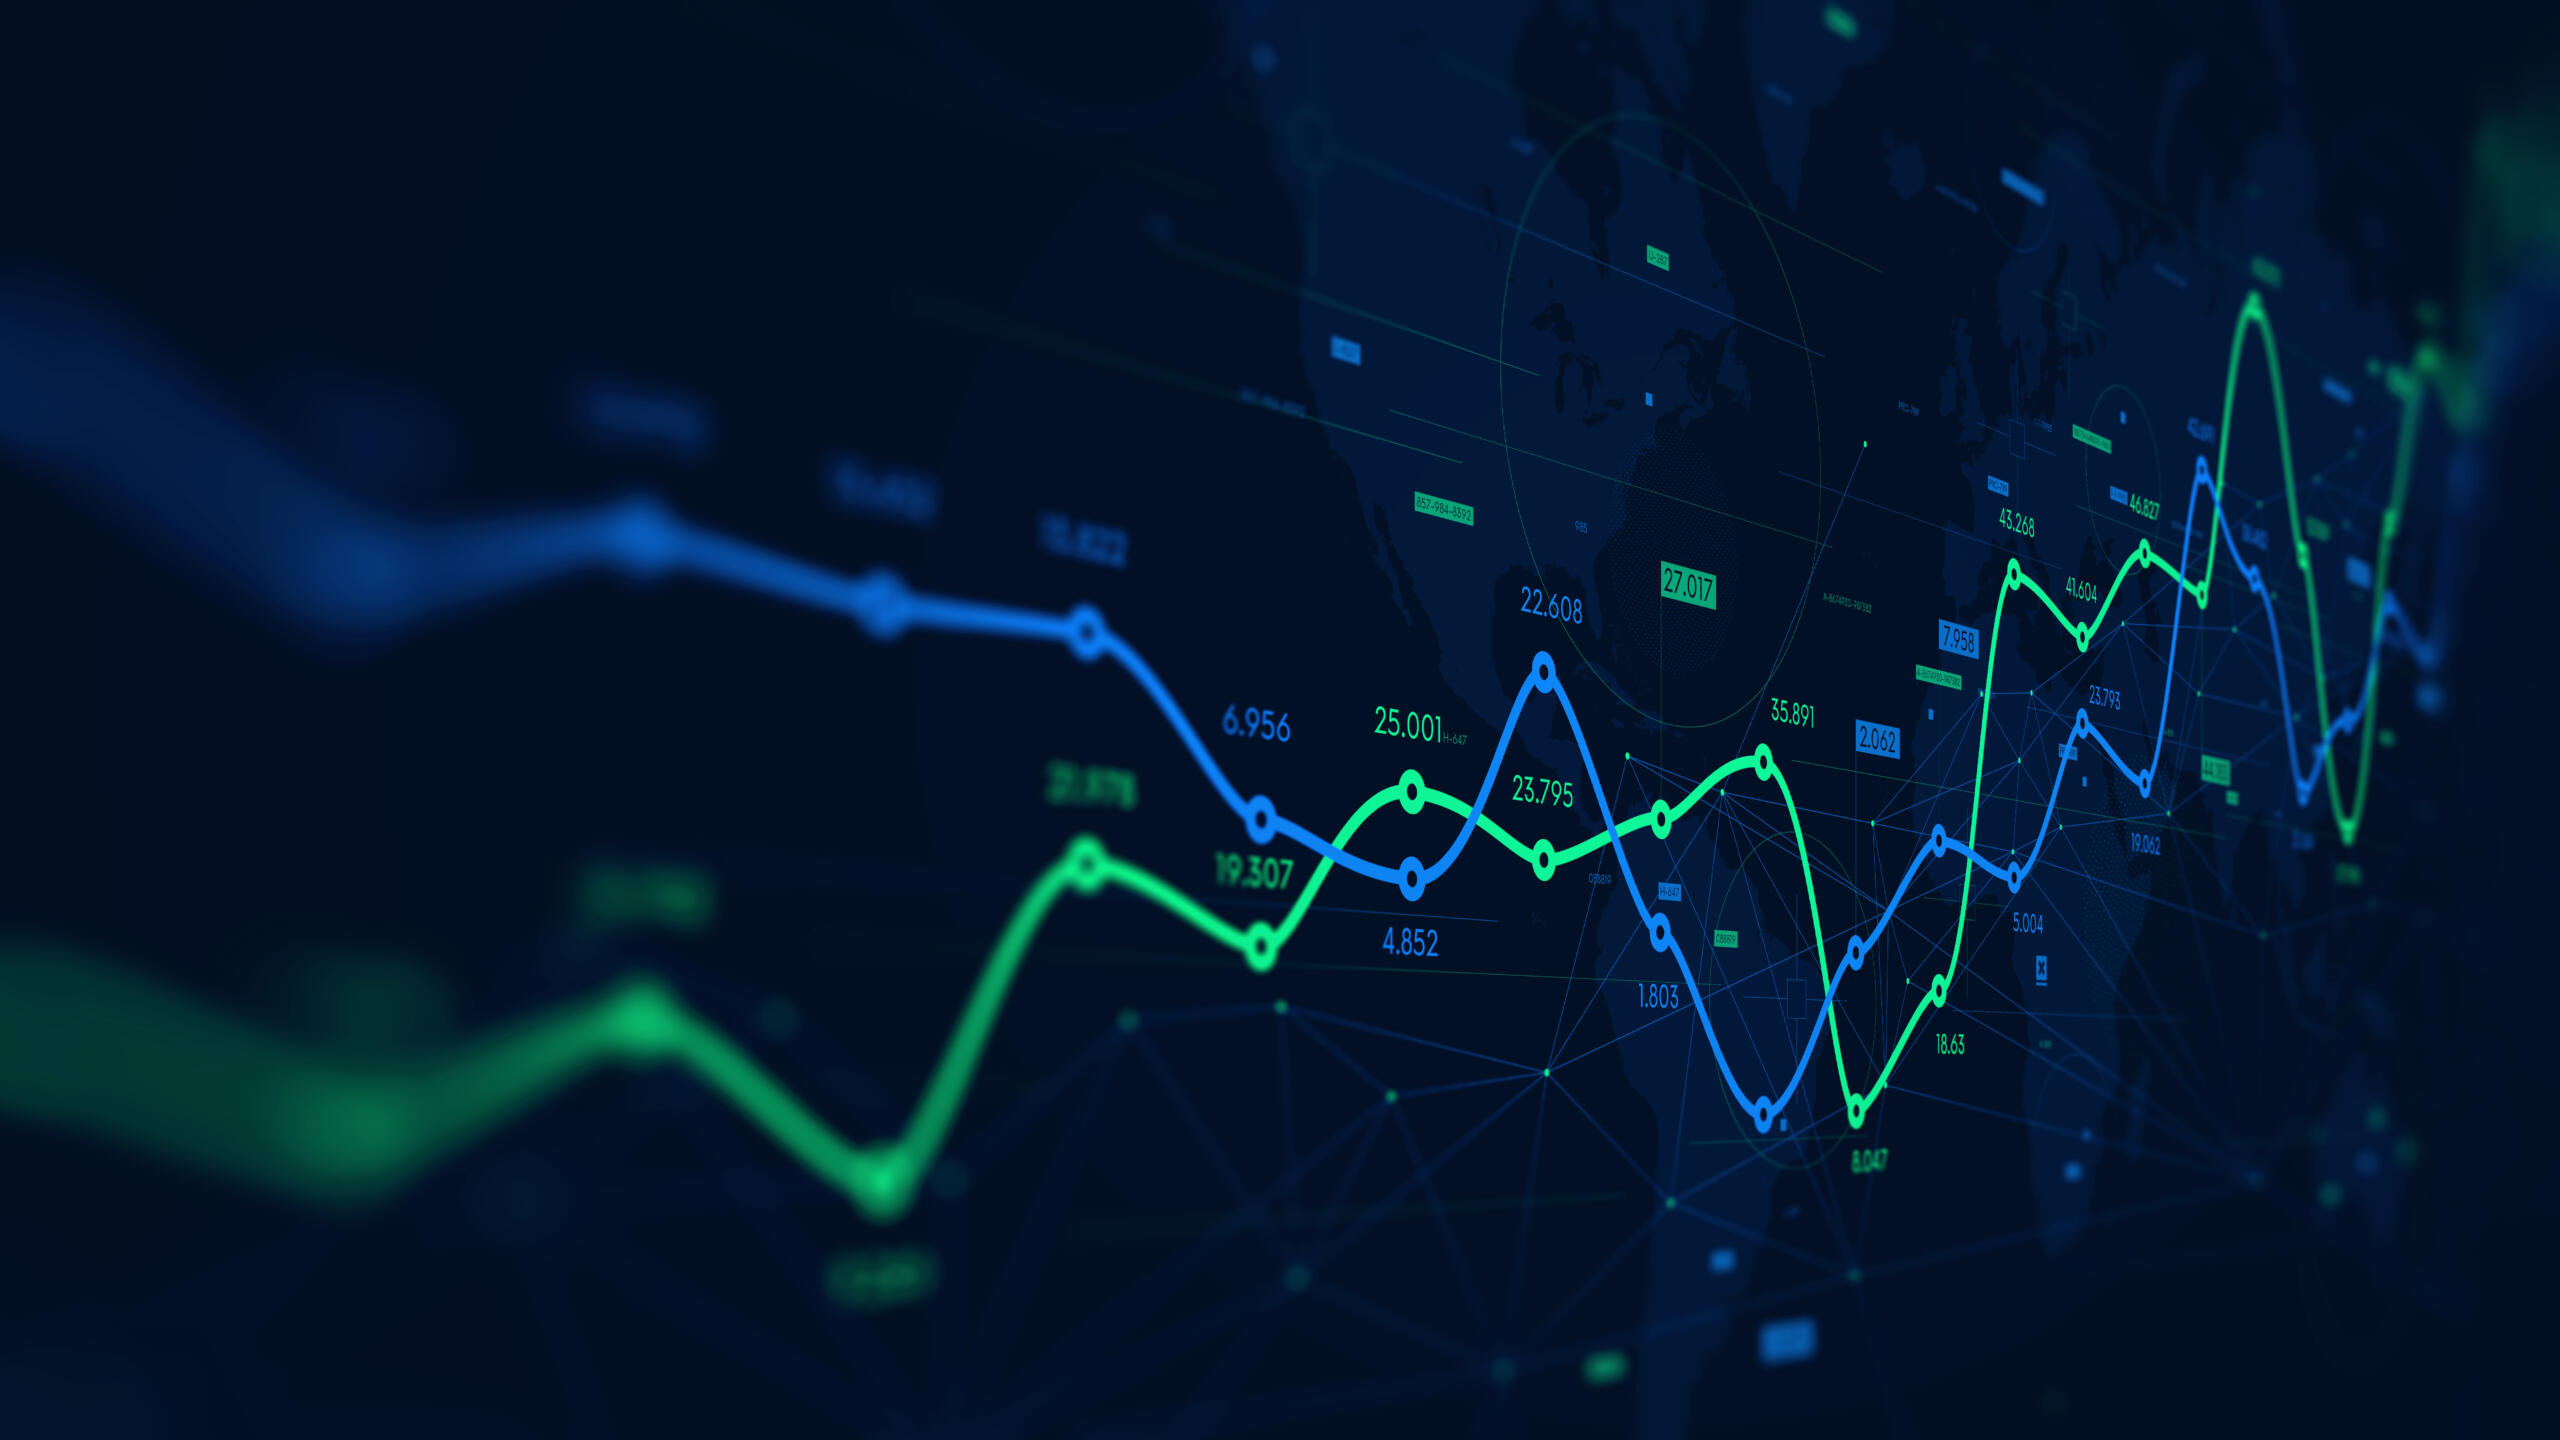 Digital stock market trends in blue and green displayed on a black background.